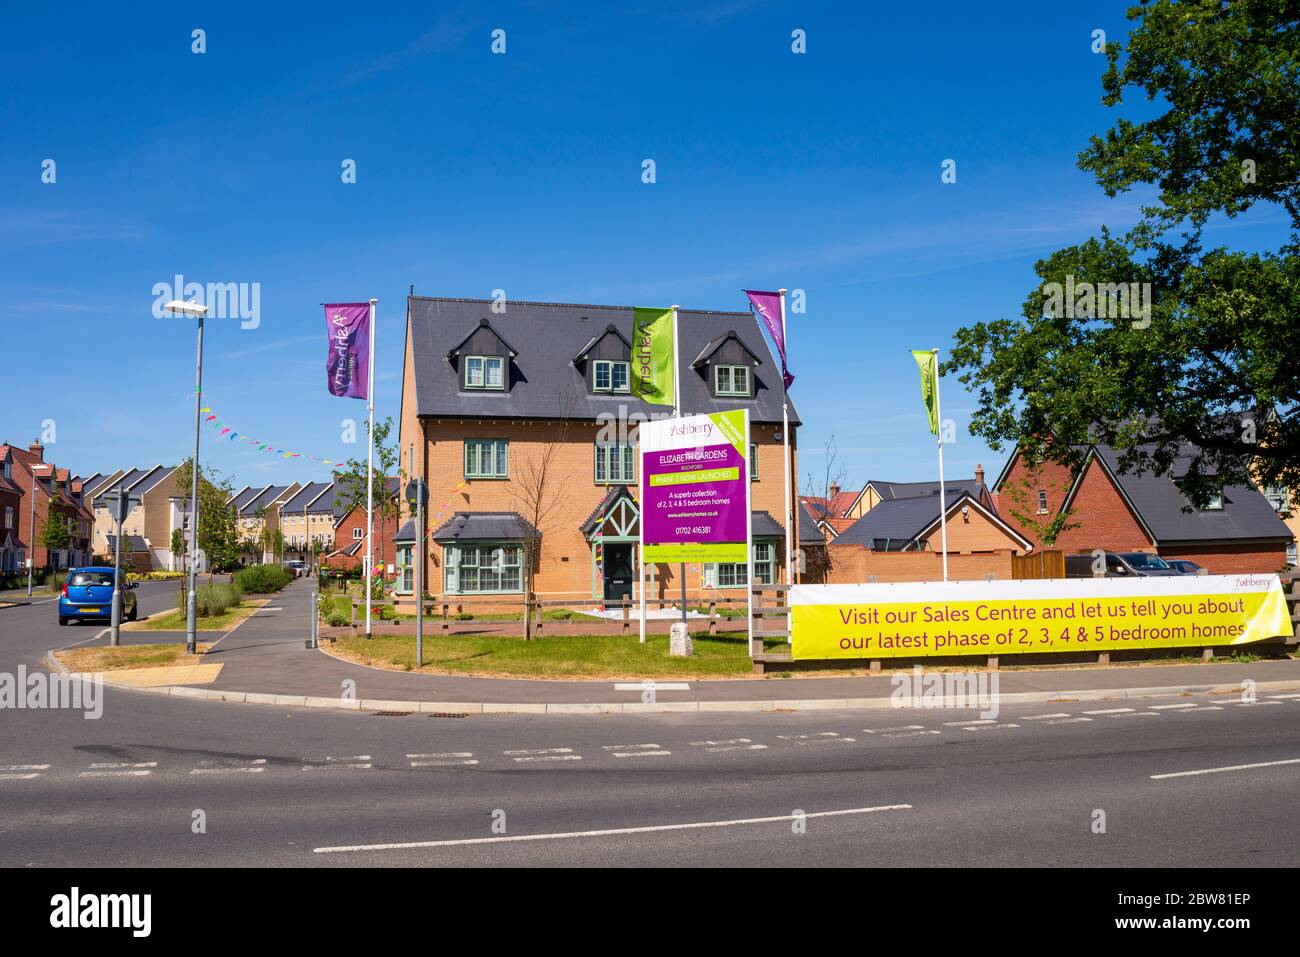 Ashberry Homes estate, Elizabeth Gardens in Rochford, Southend, Essex, UK. New homes for sale. Show home with advertising banner and sign. Bunting Stock Photo